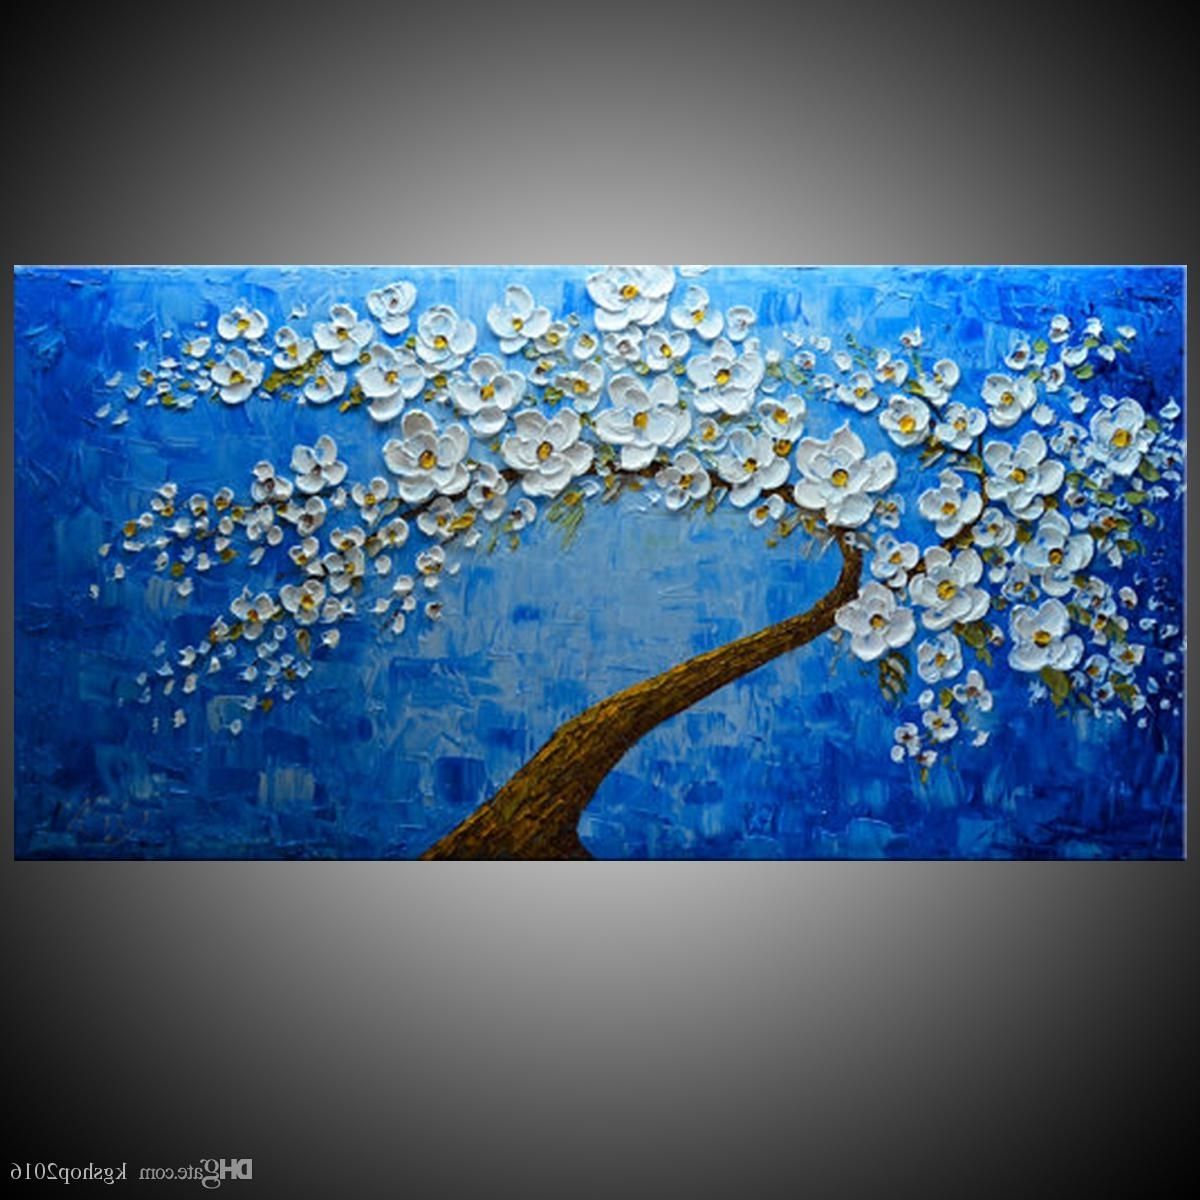 2018 Kgtech Palette Knife Flower Artwork 3d Acrylic Painting With Most Popular Blossom White 3d Wall Art (View 12 of 15)